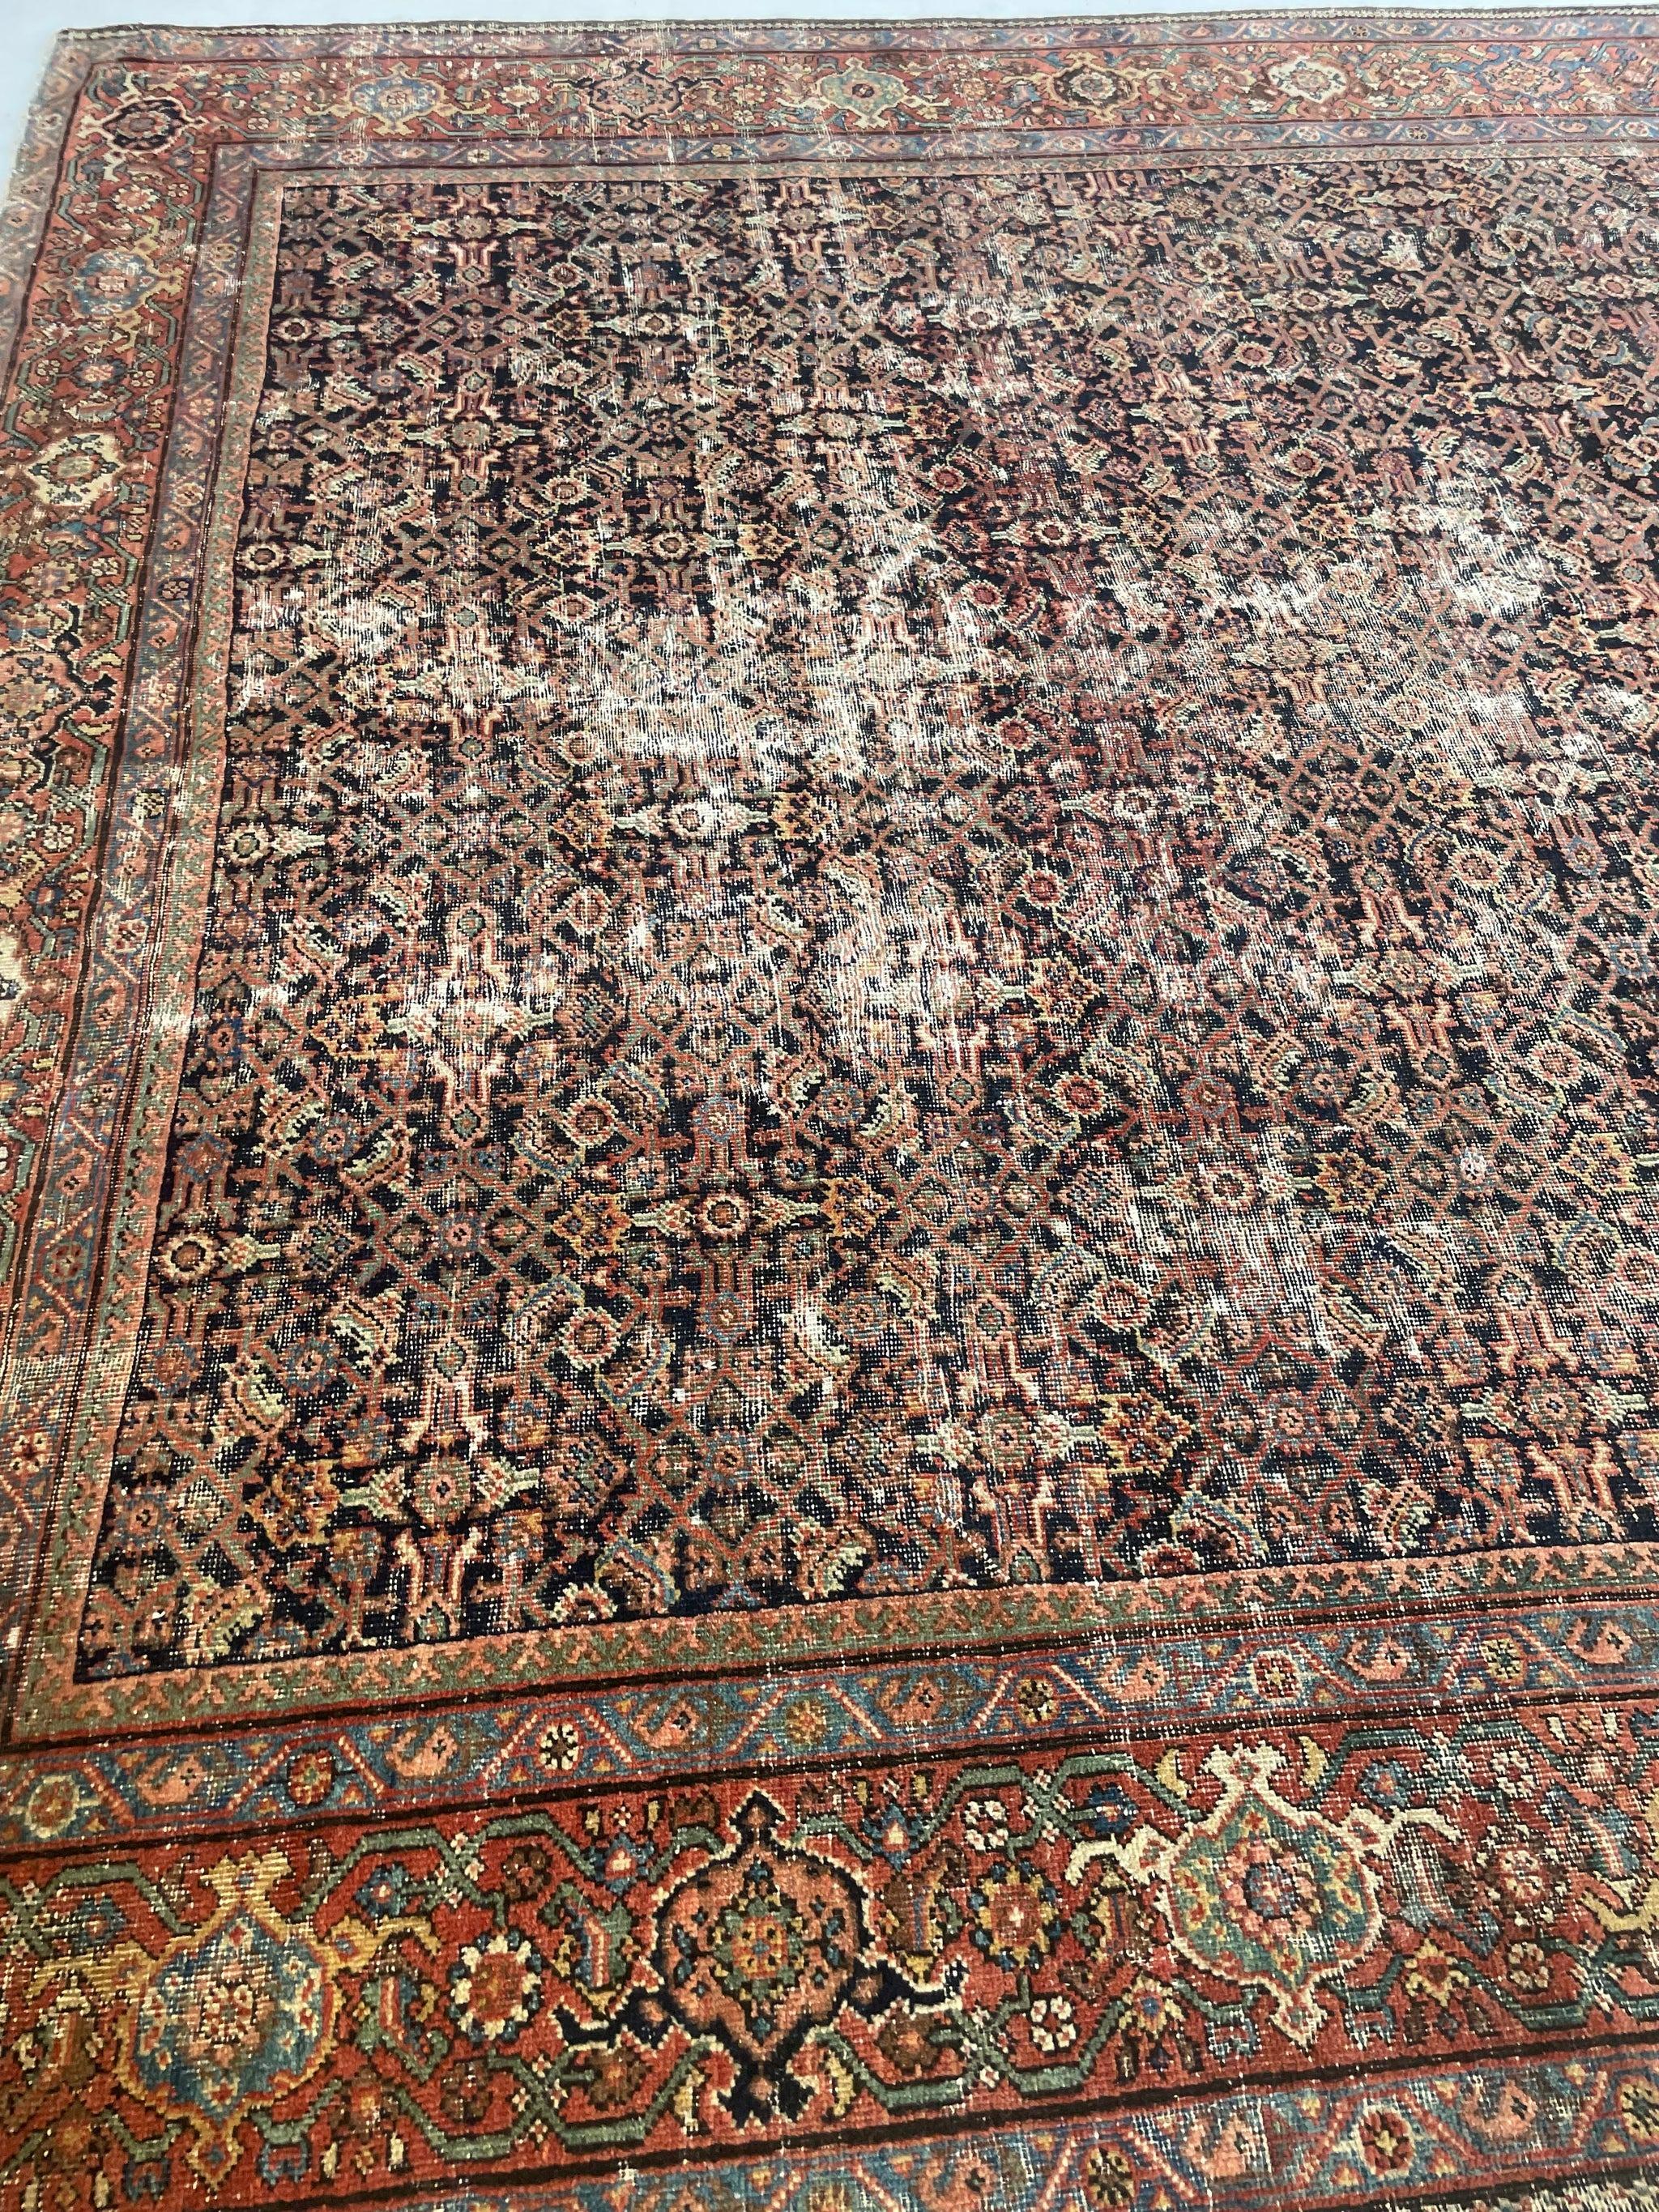 Antique Persian Carpet Rug in Deep Old-World Indigo, circa 1900-1915's In Good Condition For Sale In Milwaukee, WI